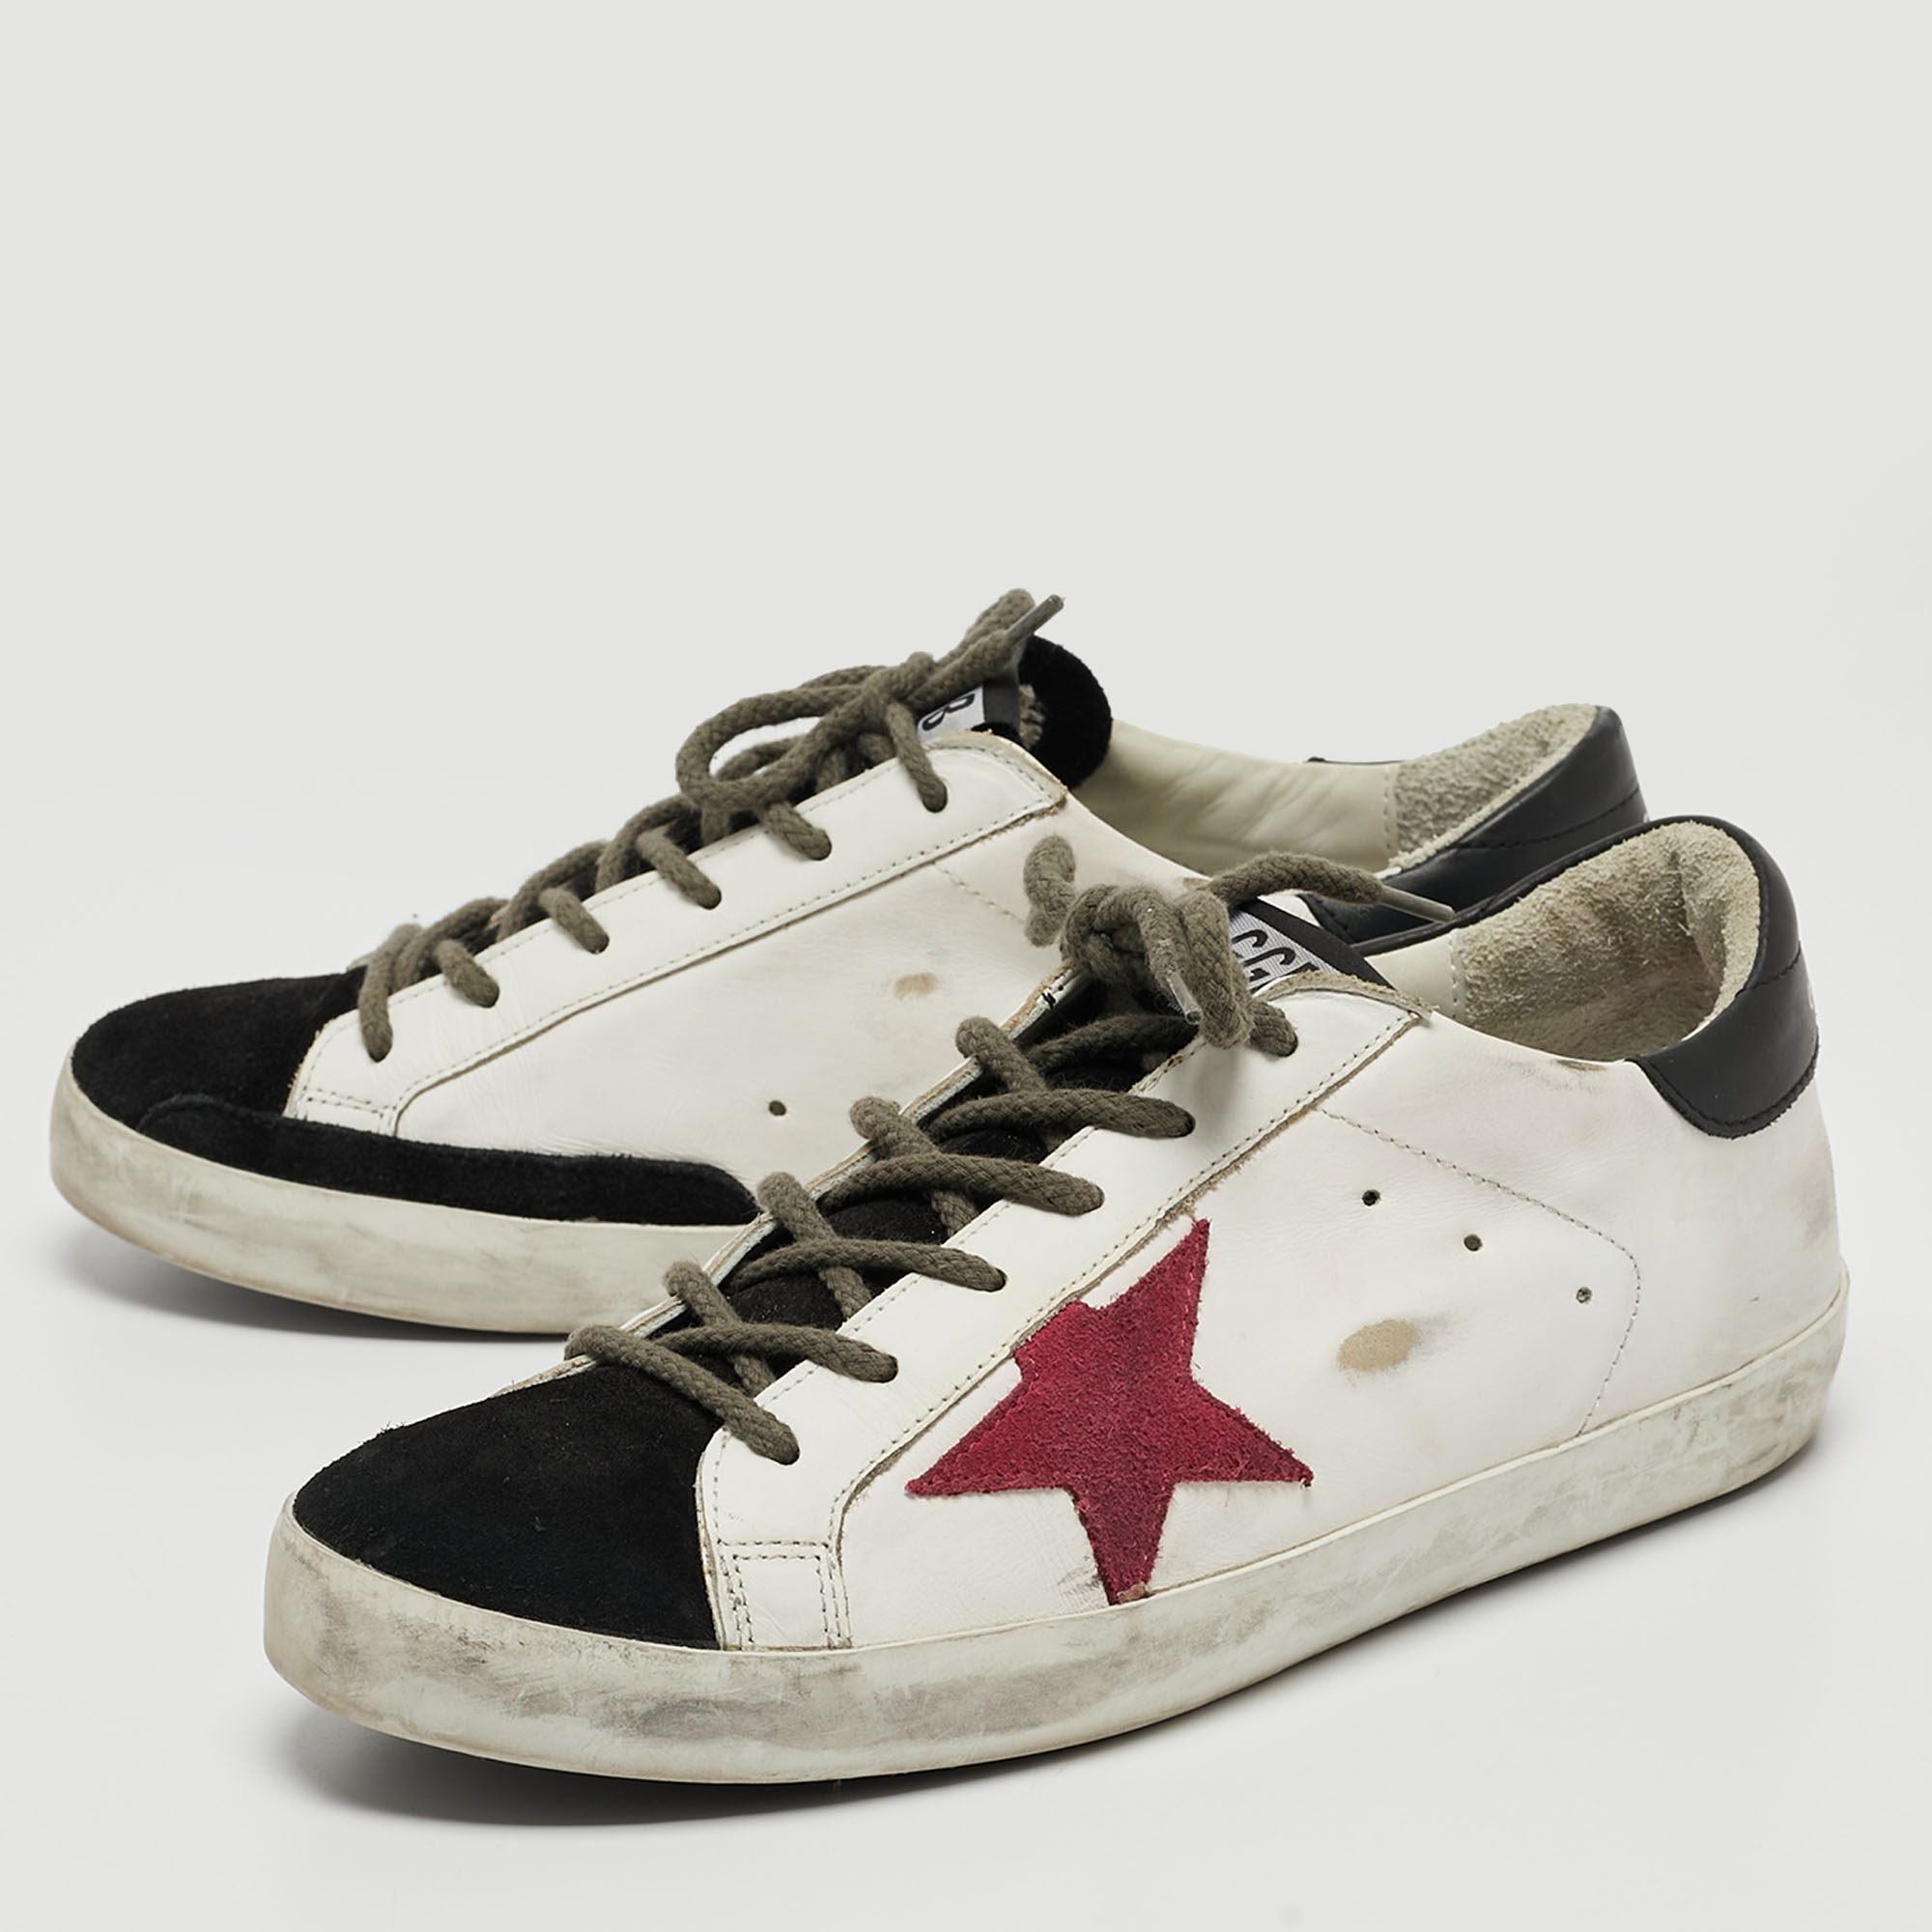 

Golden Goose White/Black Leather and Suede Superstar Sneakers Size